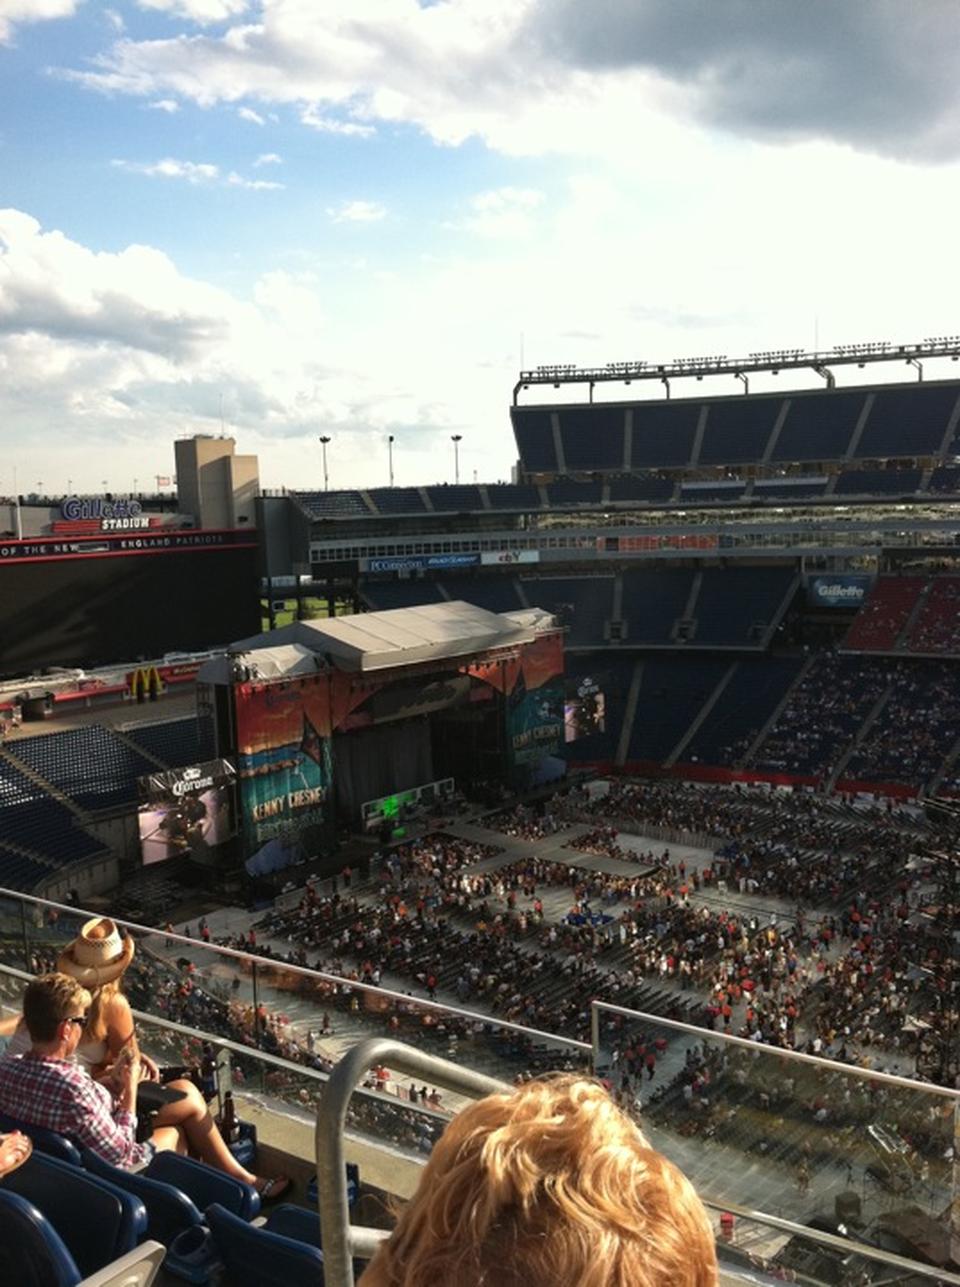 section 307, row 4 seat view  for concert - gillette stadium